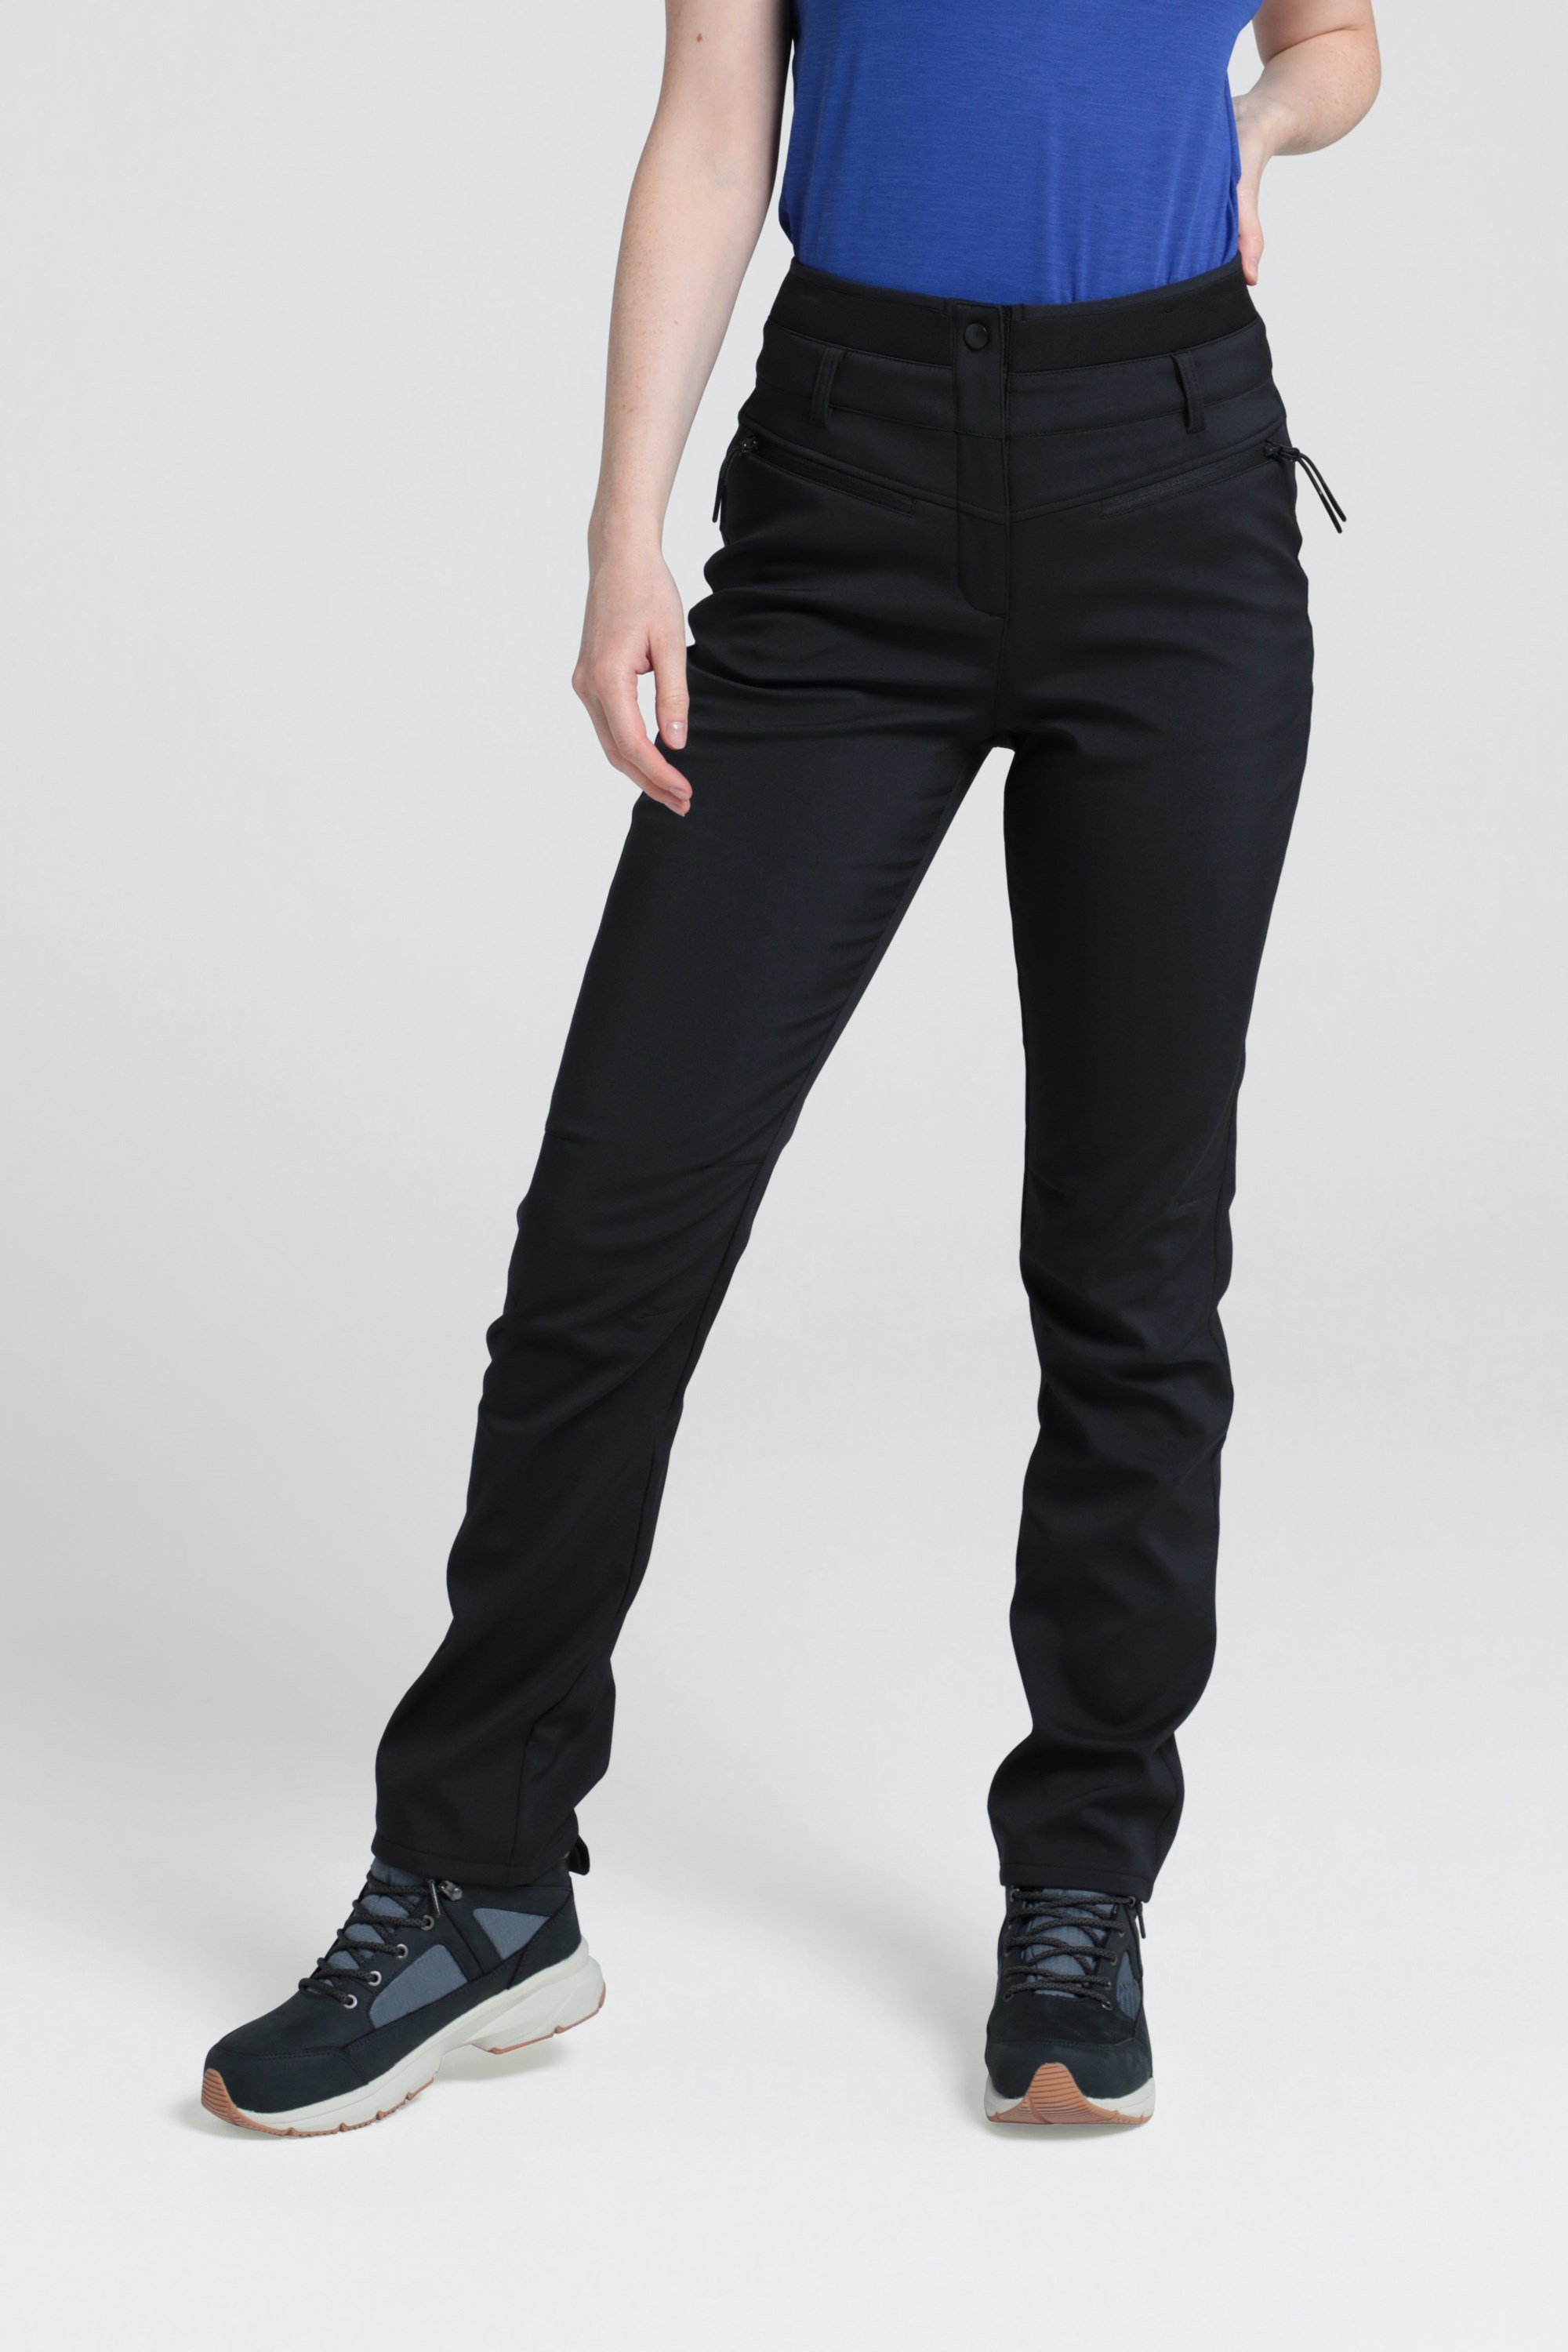 Mountain Warehouse Agile Lightweight Womens UV-Pants Black 8 : :  Clothing, Shoes & Accessories